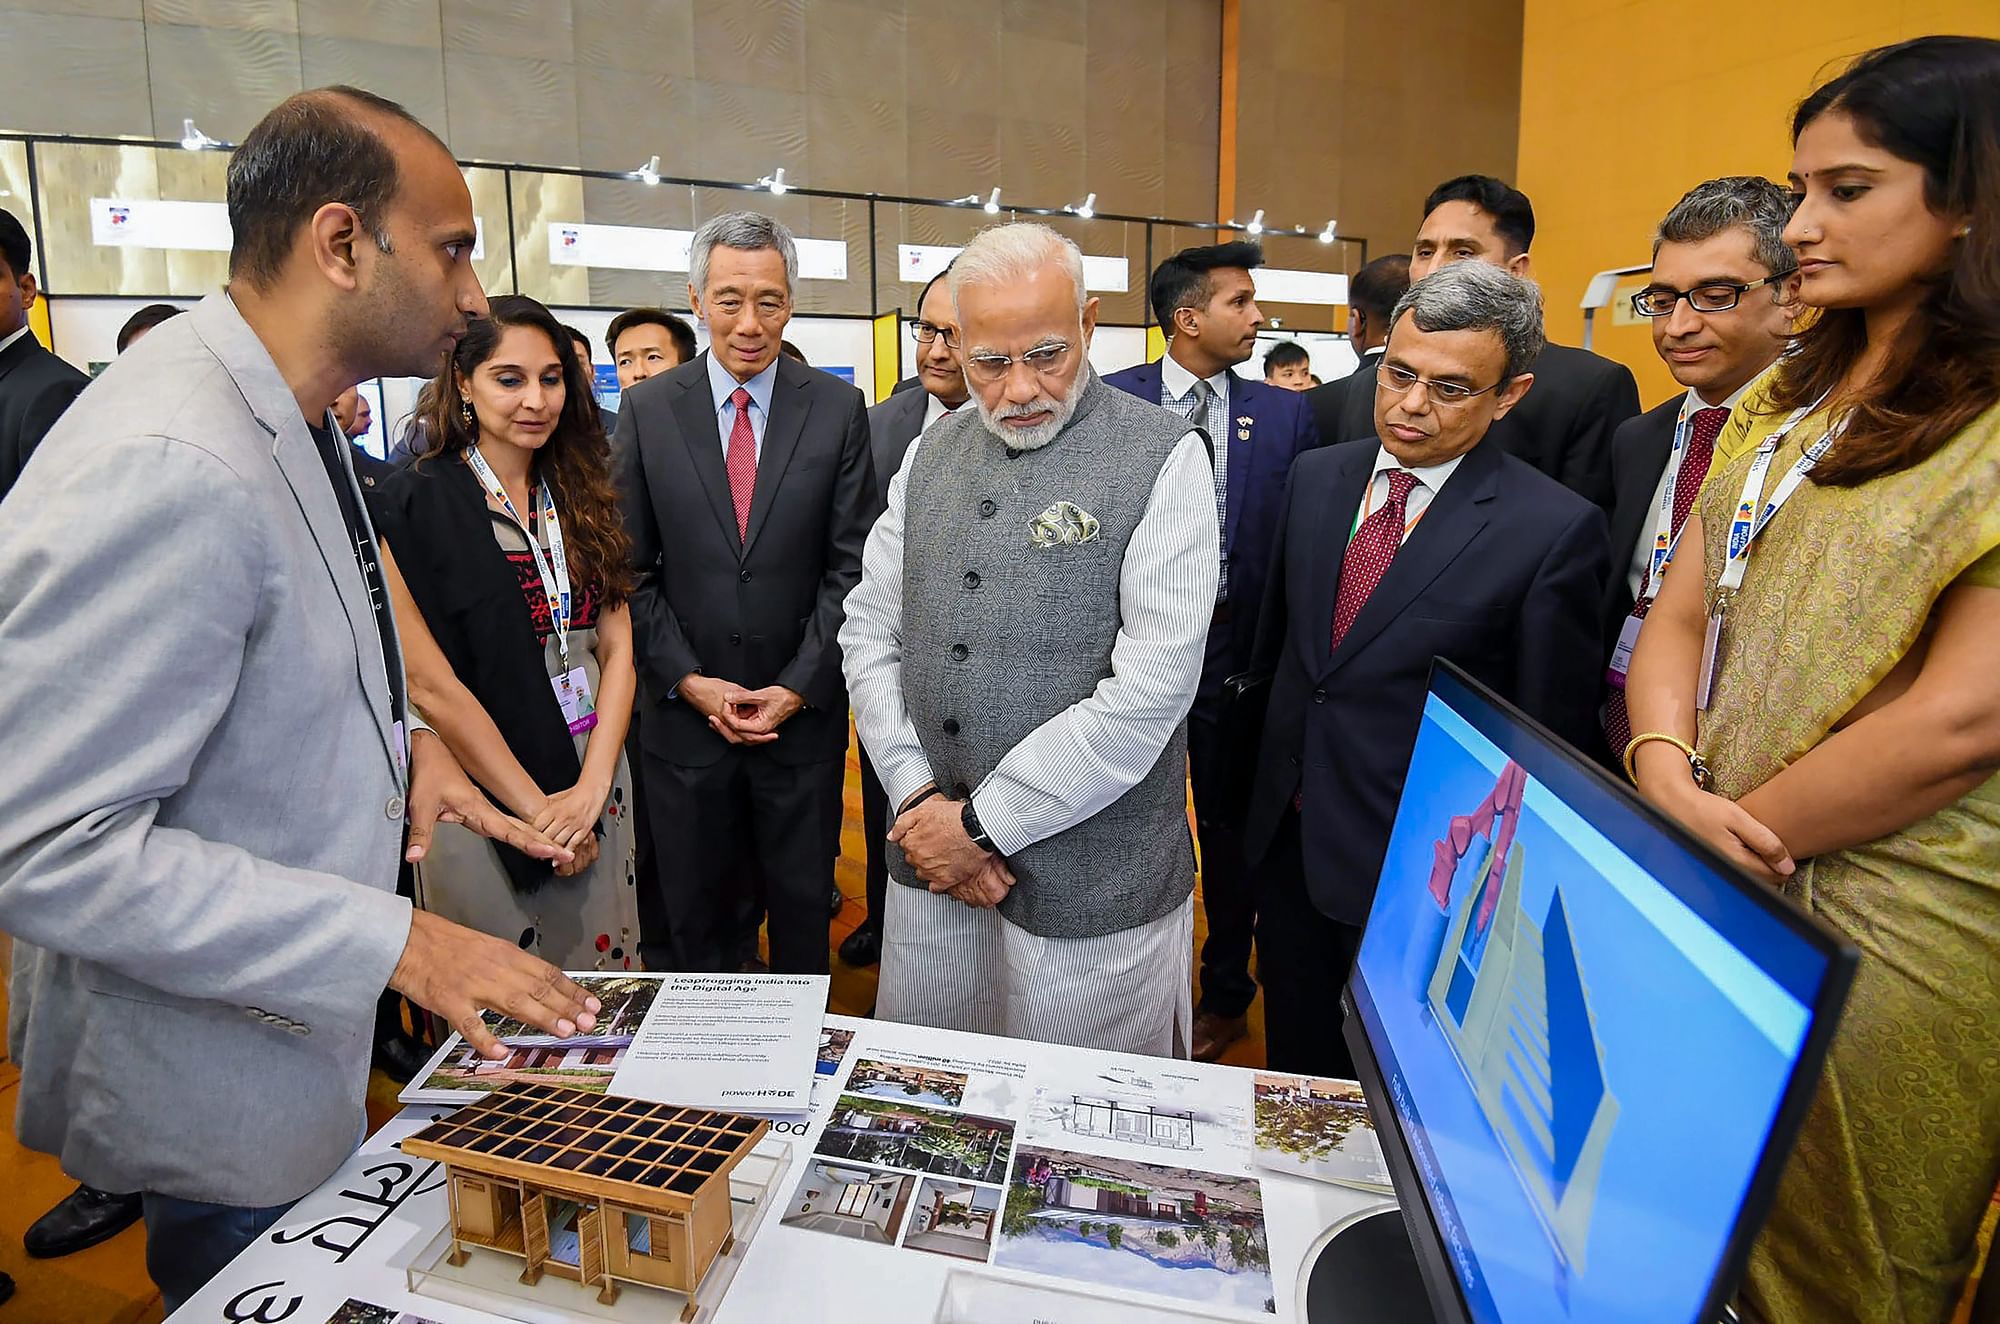 Prime Minister Narendra Modi and Singapore Prime Minister Lee Hsien Loong visit the India-Singapore Enterprise and Innovation Exhibitions, at Marina Bay Sands Convention Centre in Singapore.